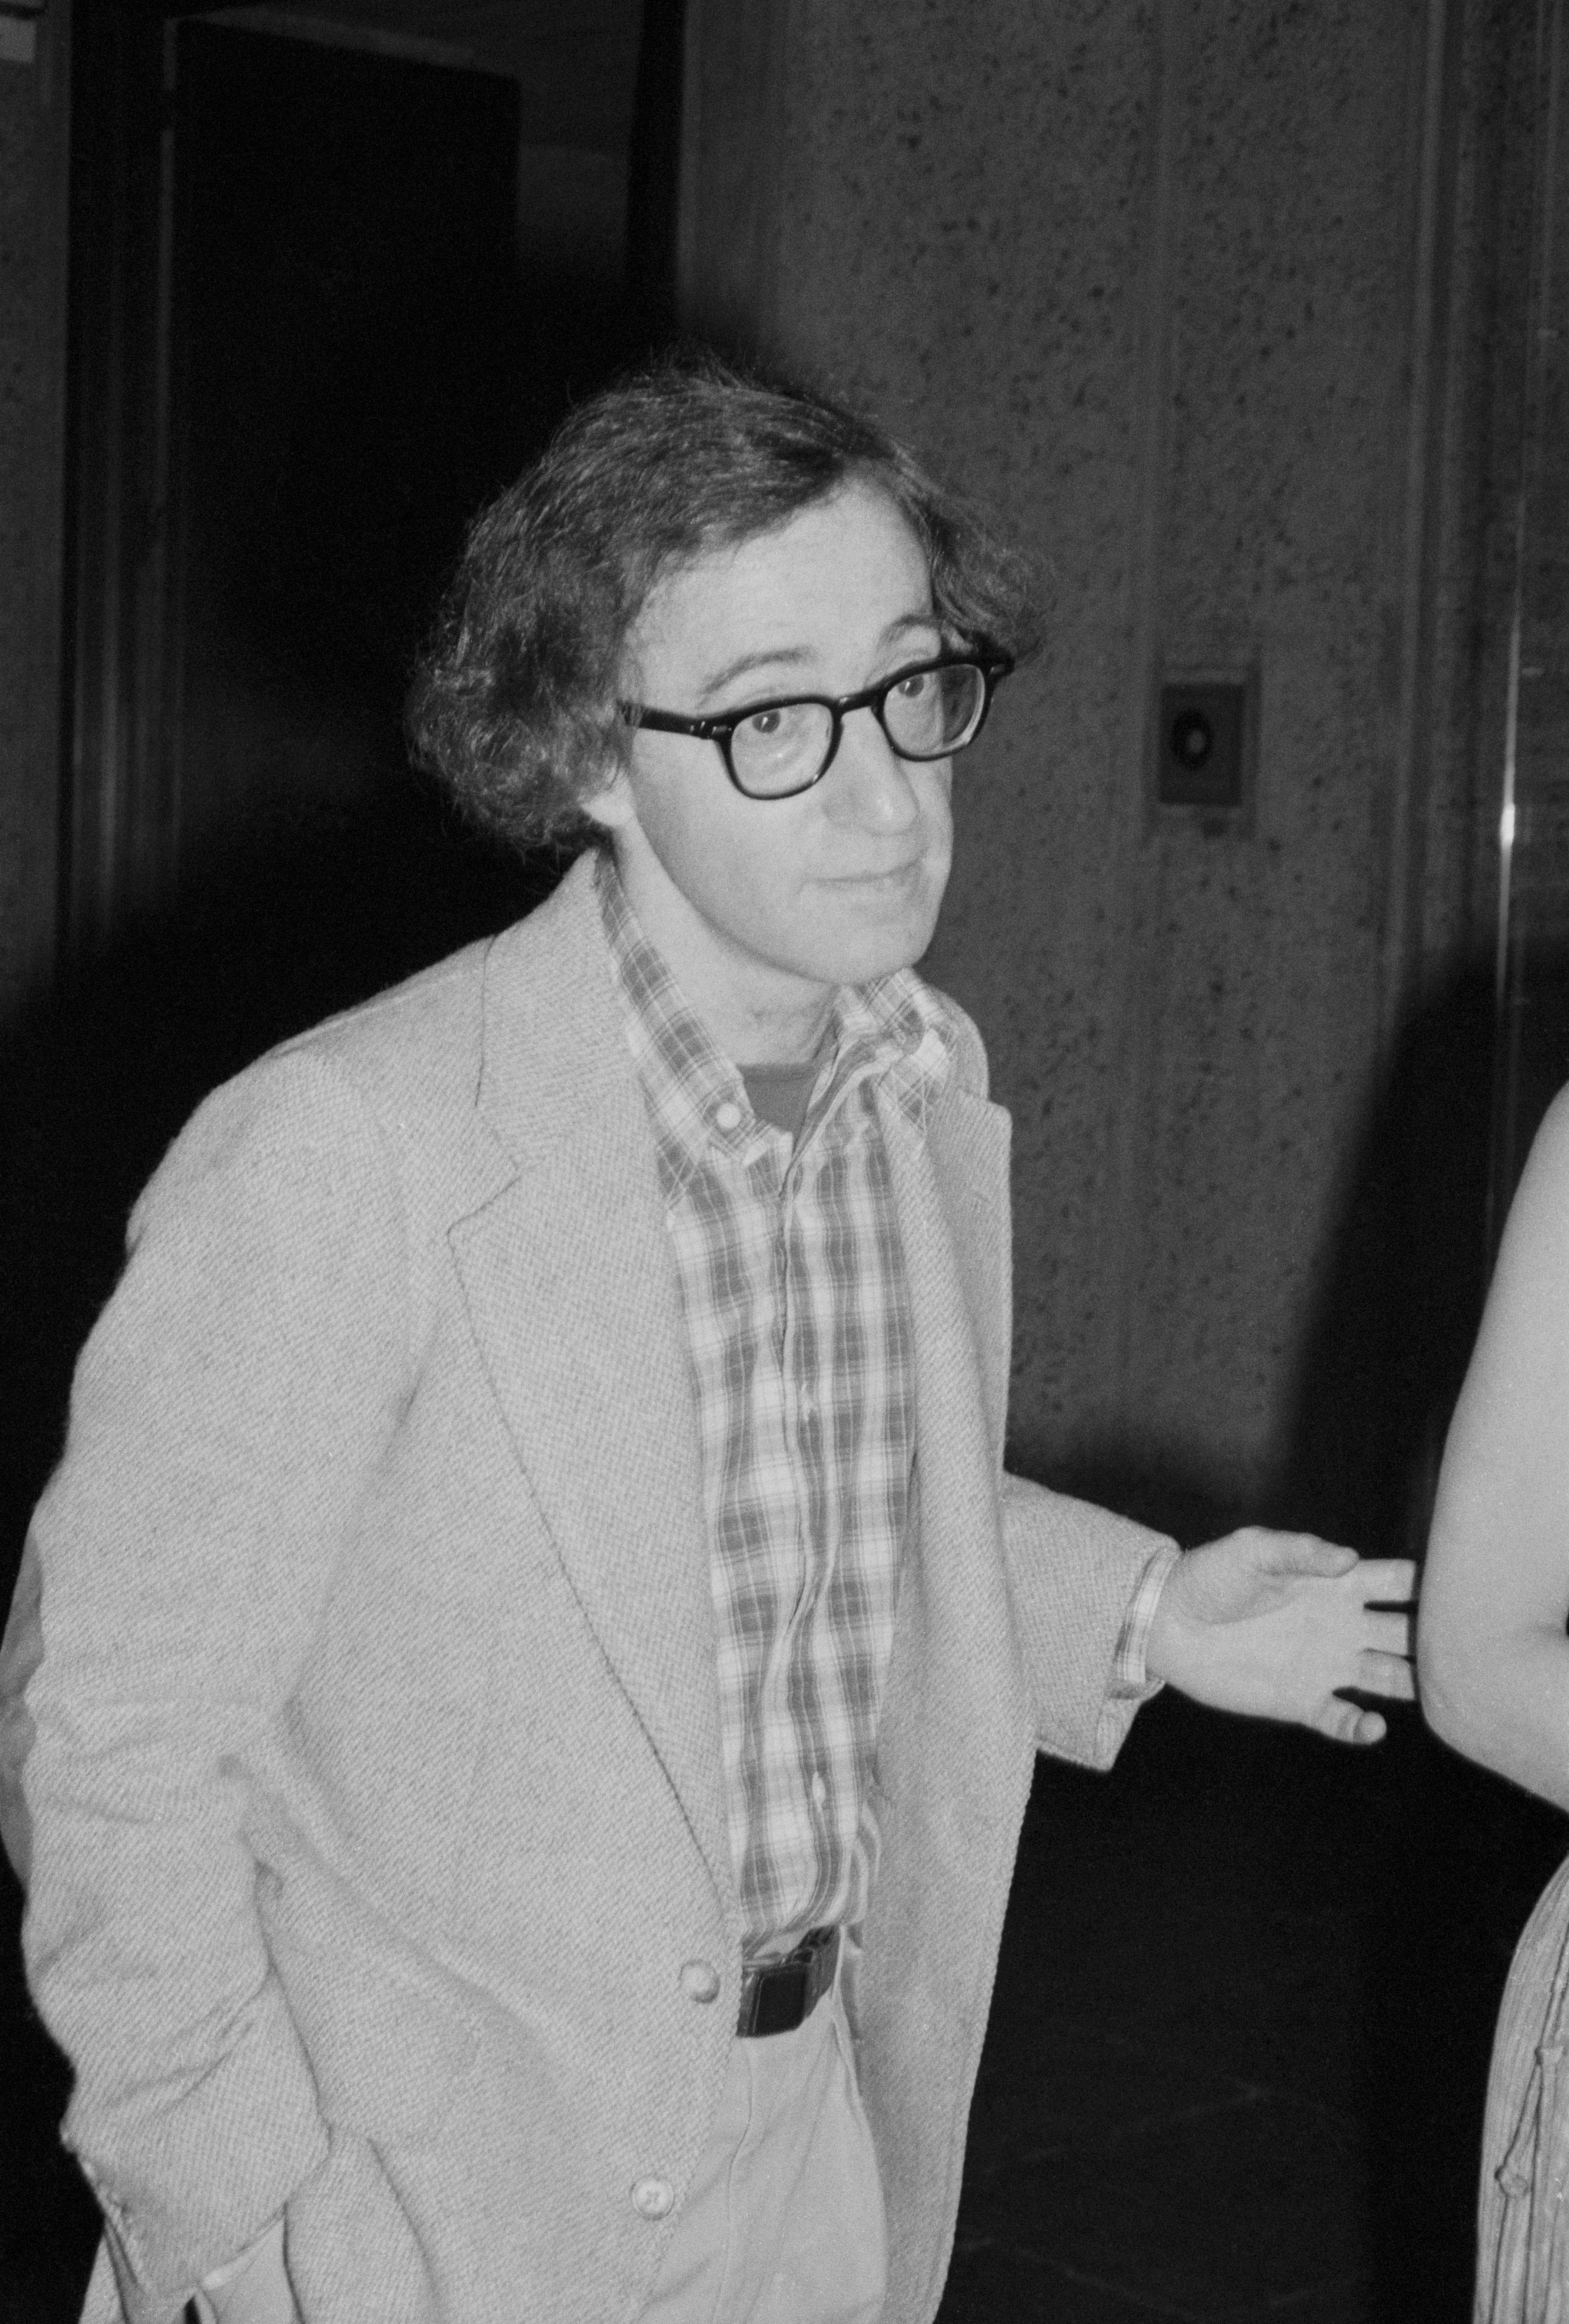 A photo of Woody Allen taken in New York in 1960. | Source: Getty Images